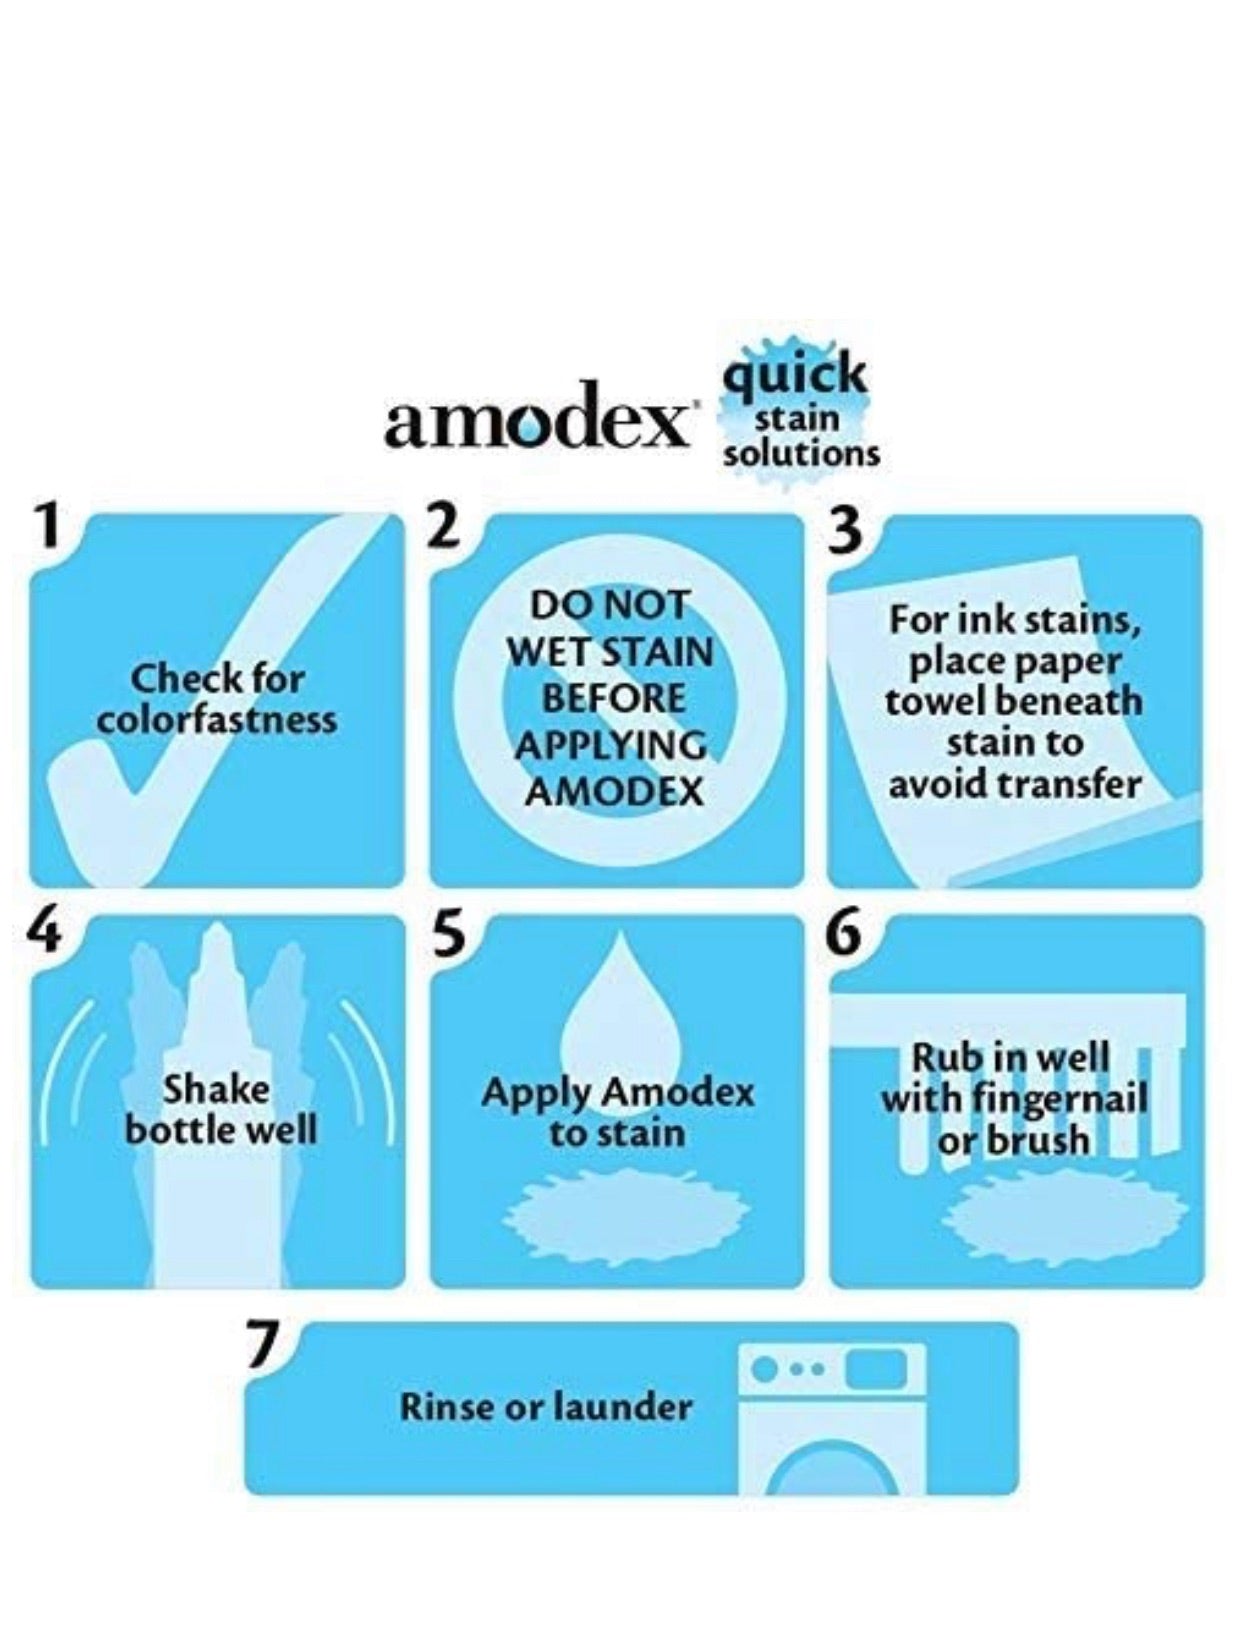 Amodex Ink and Stain Remover – Cleans Marker, Ink, Crayon, Pen, Makeup from  Furniture, Skin, Clothing, Fabric, Leather - Liquid Solution - 4 fl oz